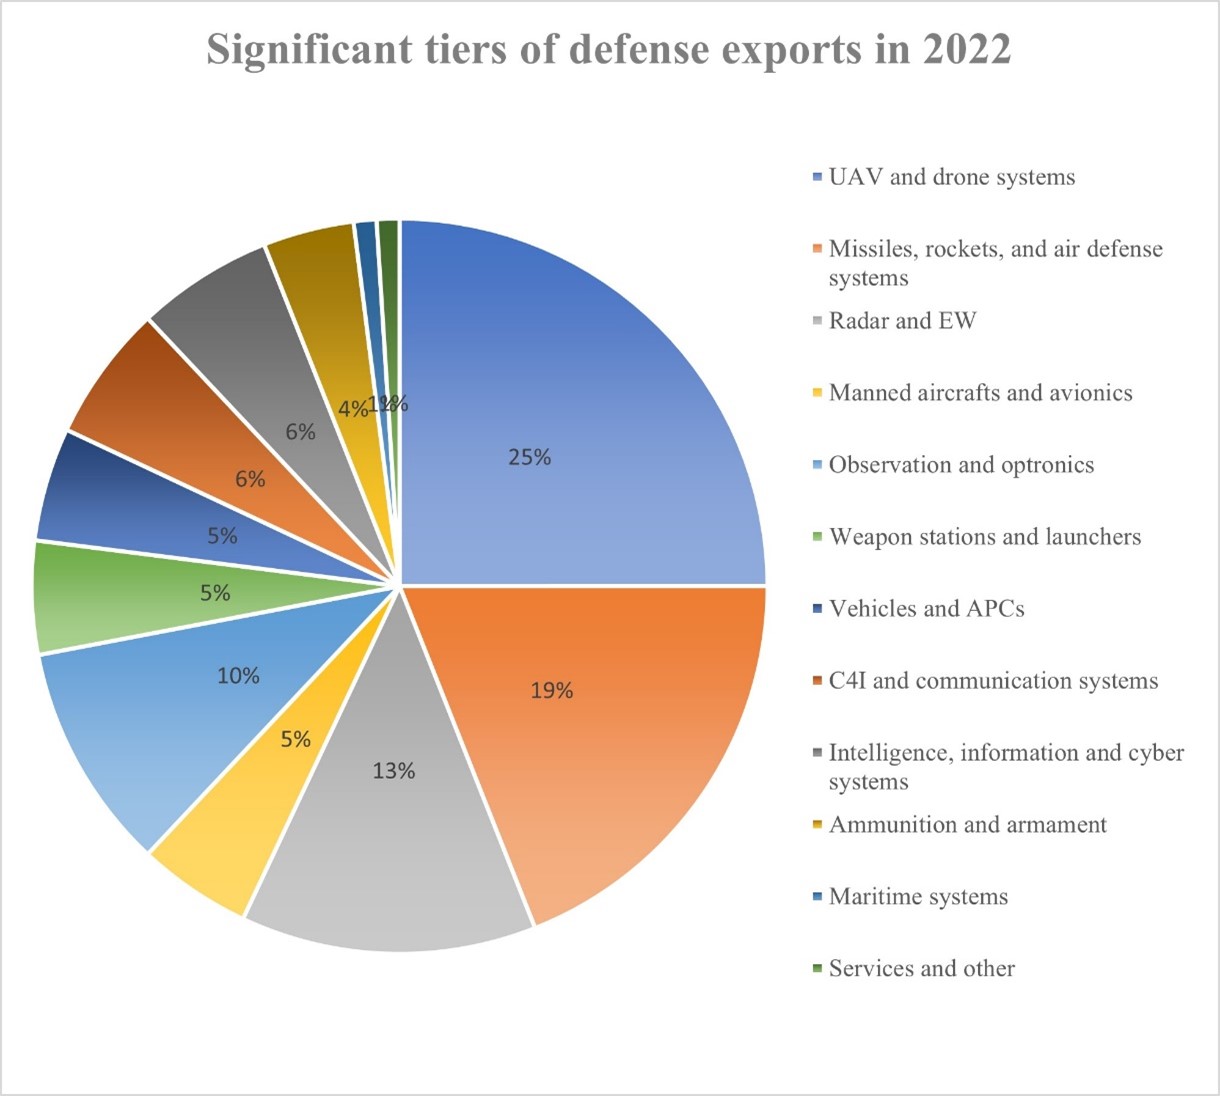 Significant Tiers of Defense Export in 2022